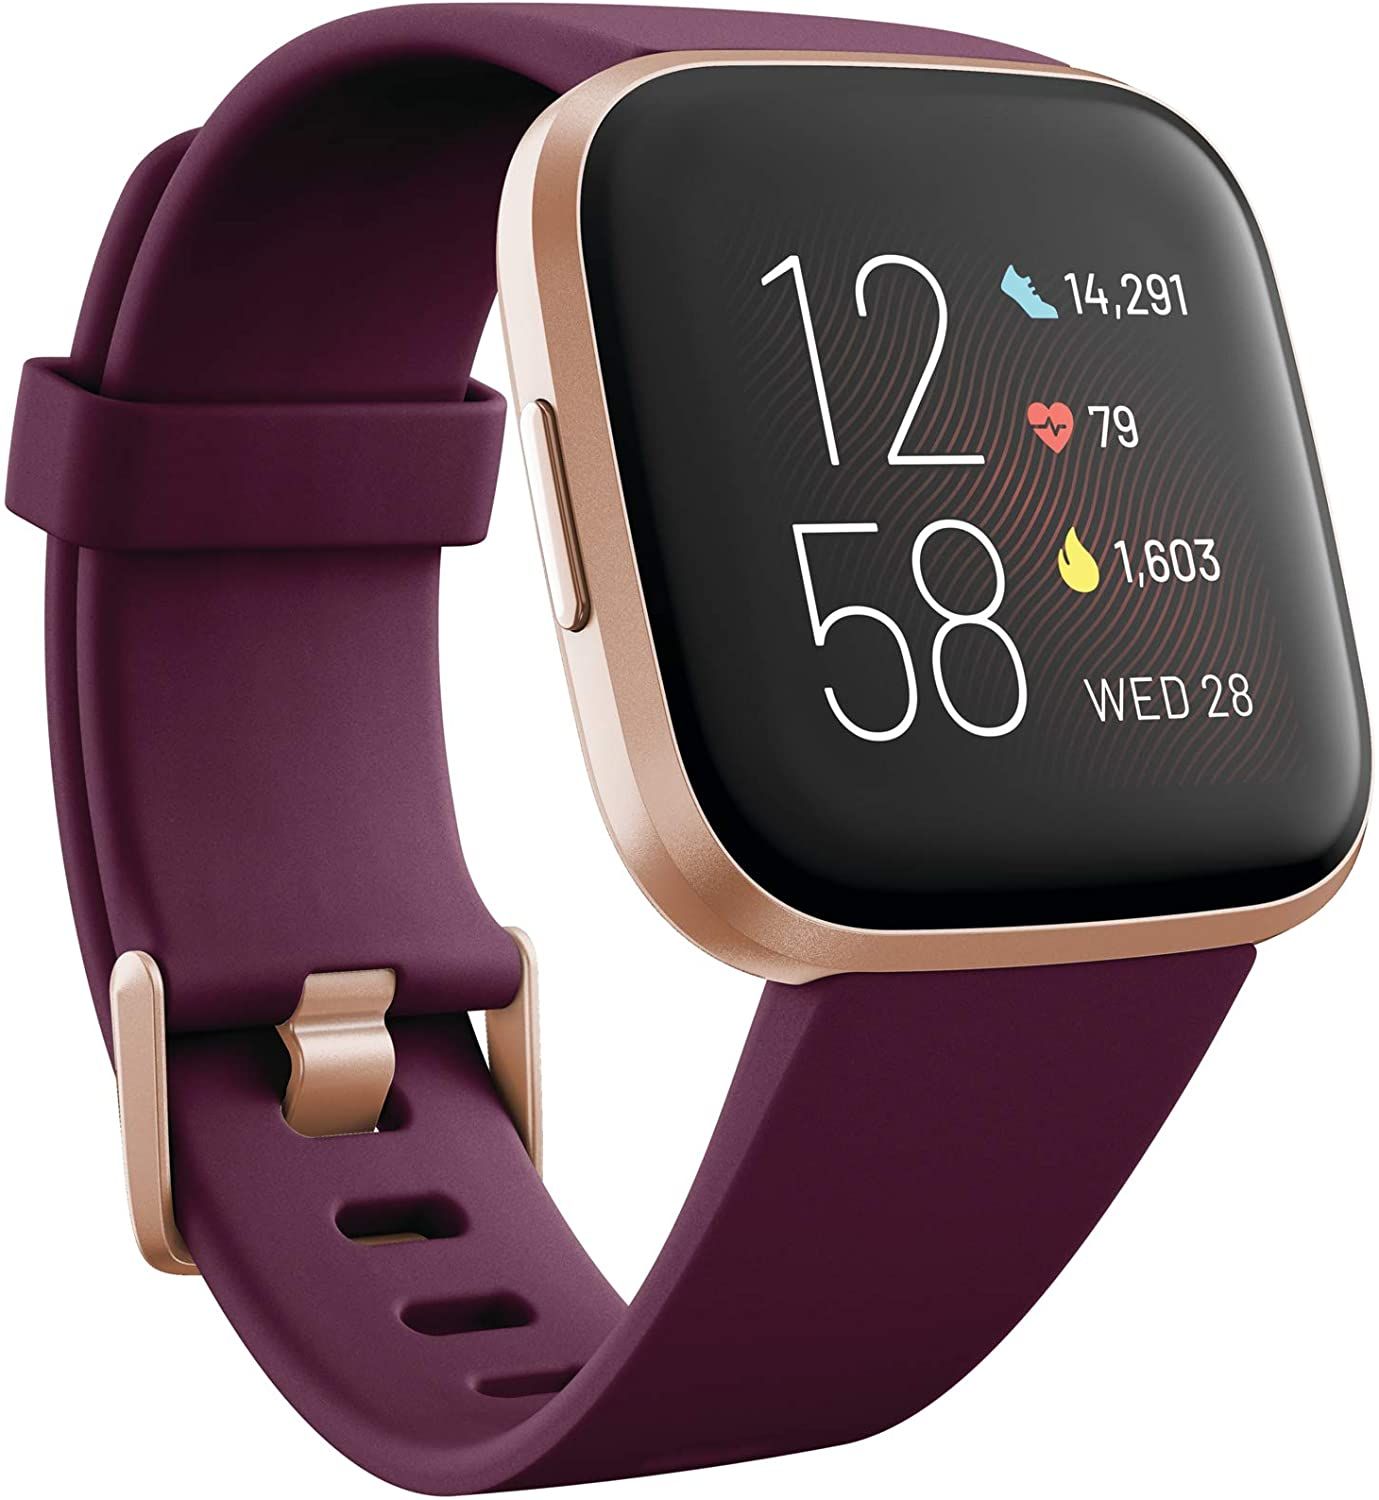 black friday fitbit watches